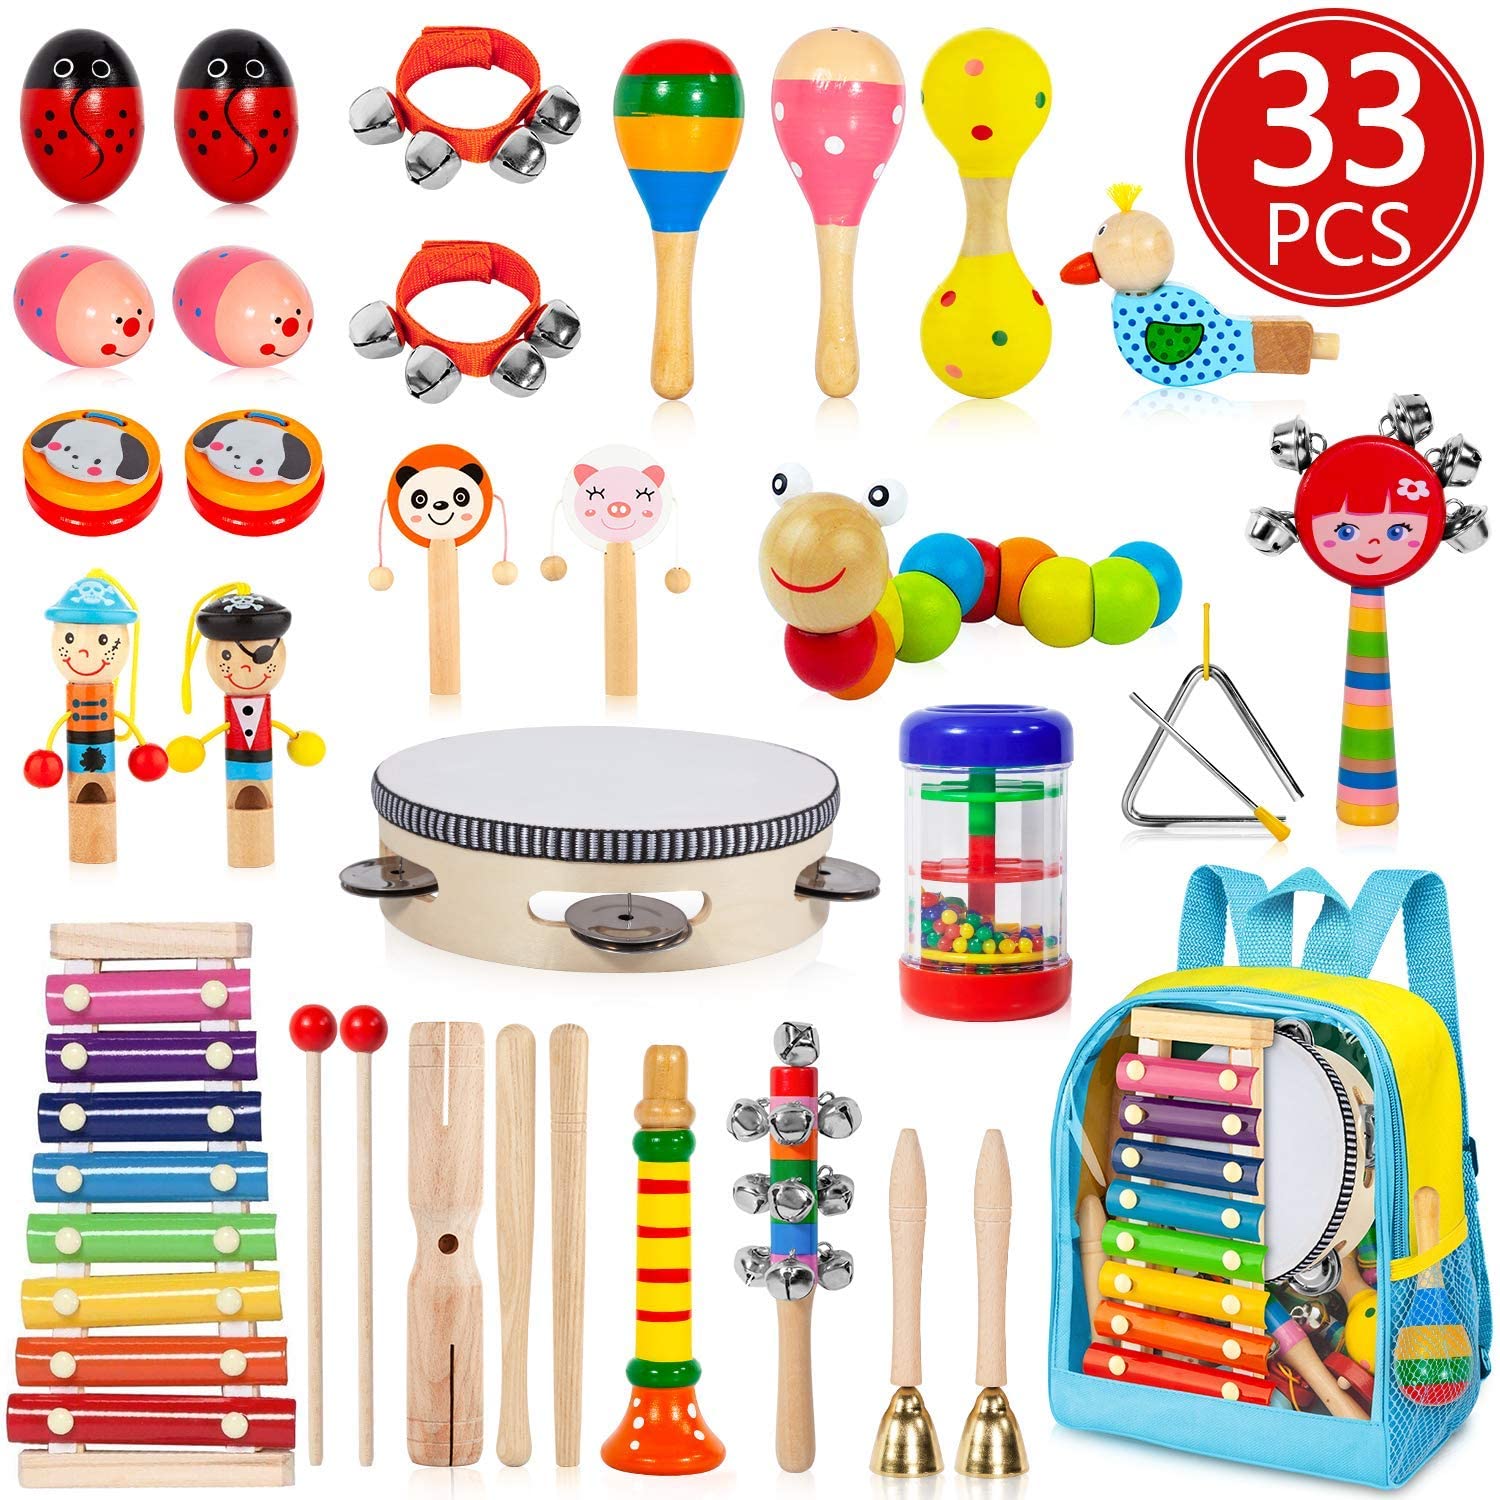 Aokiwo Kids Musical Instruments 33 Pcs 20 Types Wooden Instruments